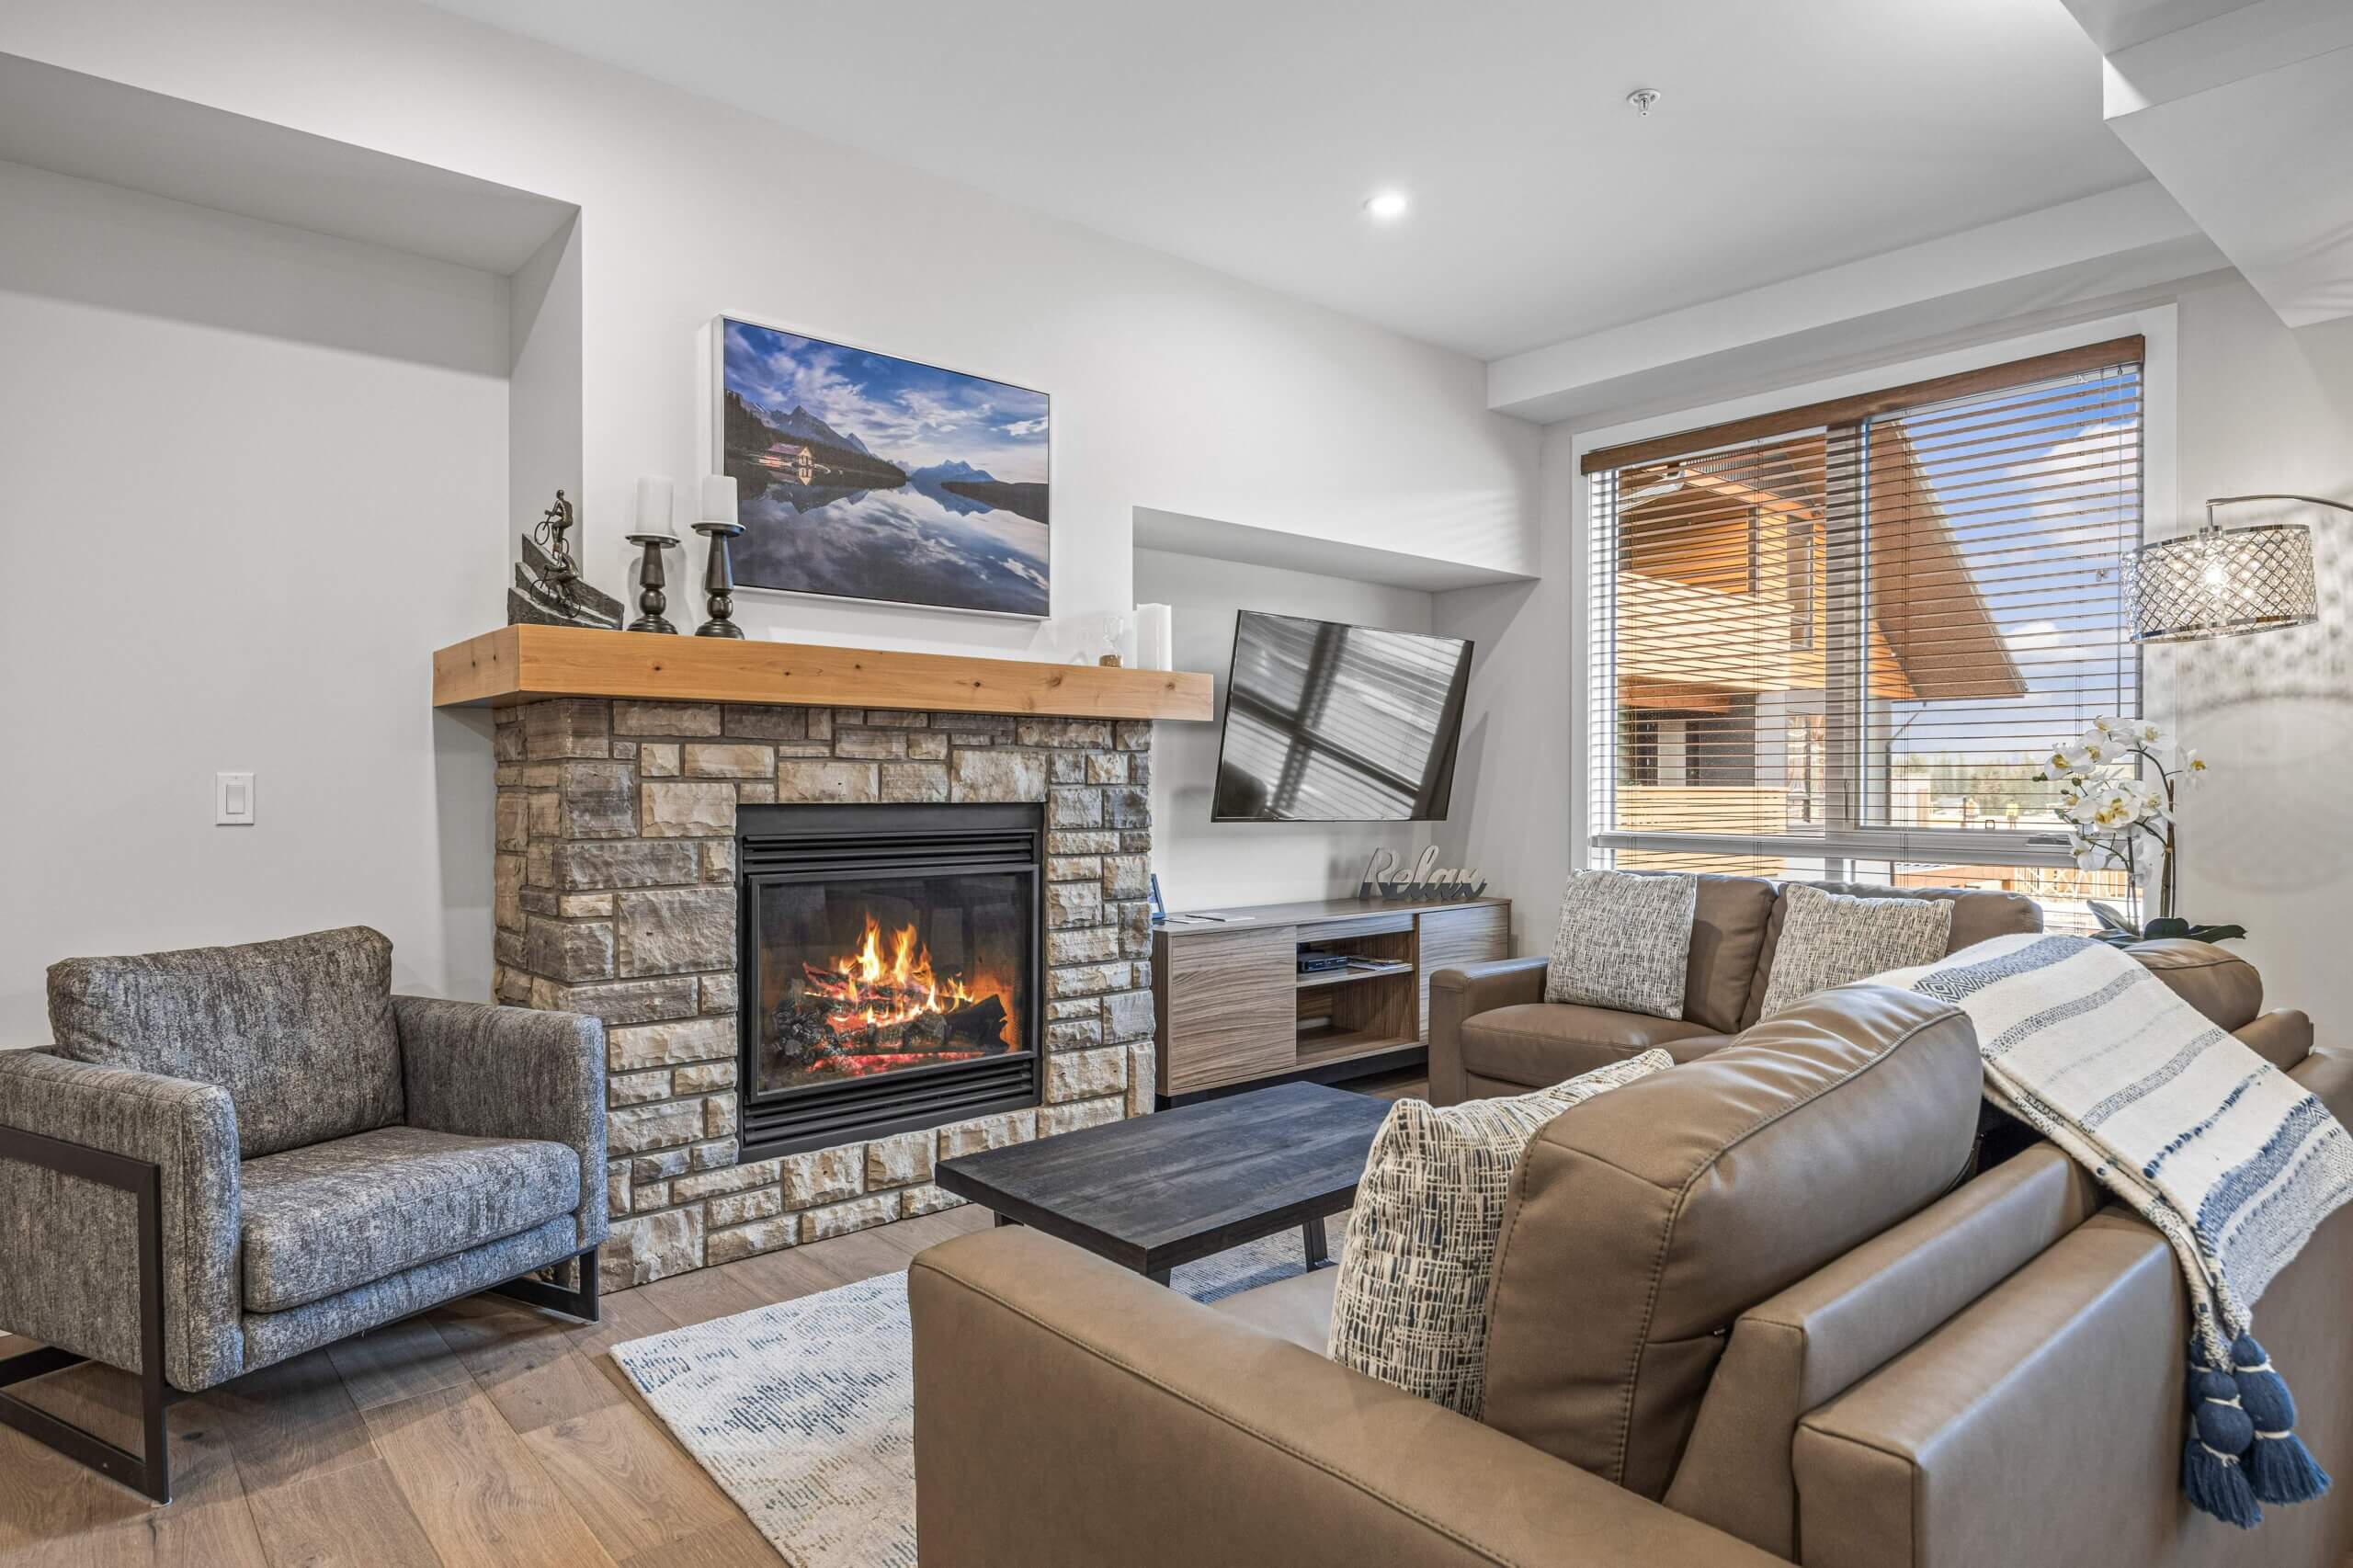 A living room with a cozy stone fireplace and comfortable couch with modern finishes in a Spring Creek Vacations vacation rental in Canmore, Alberta.